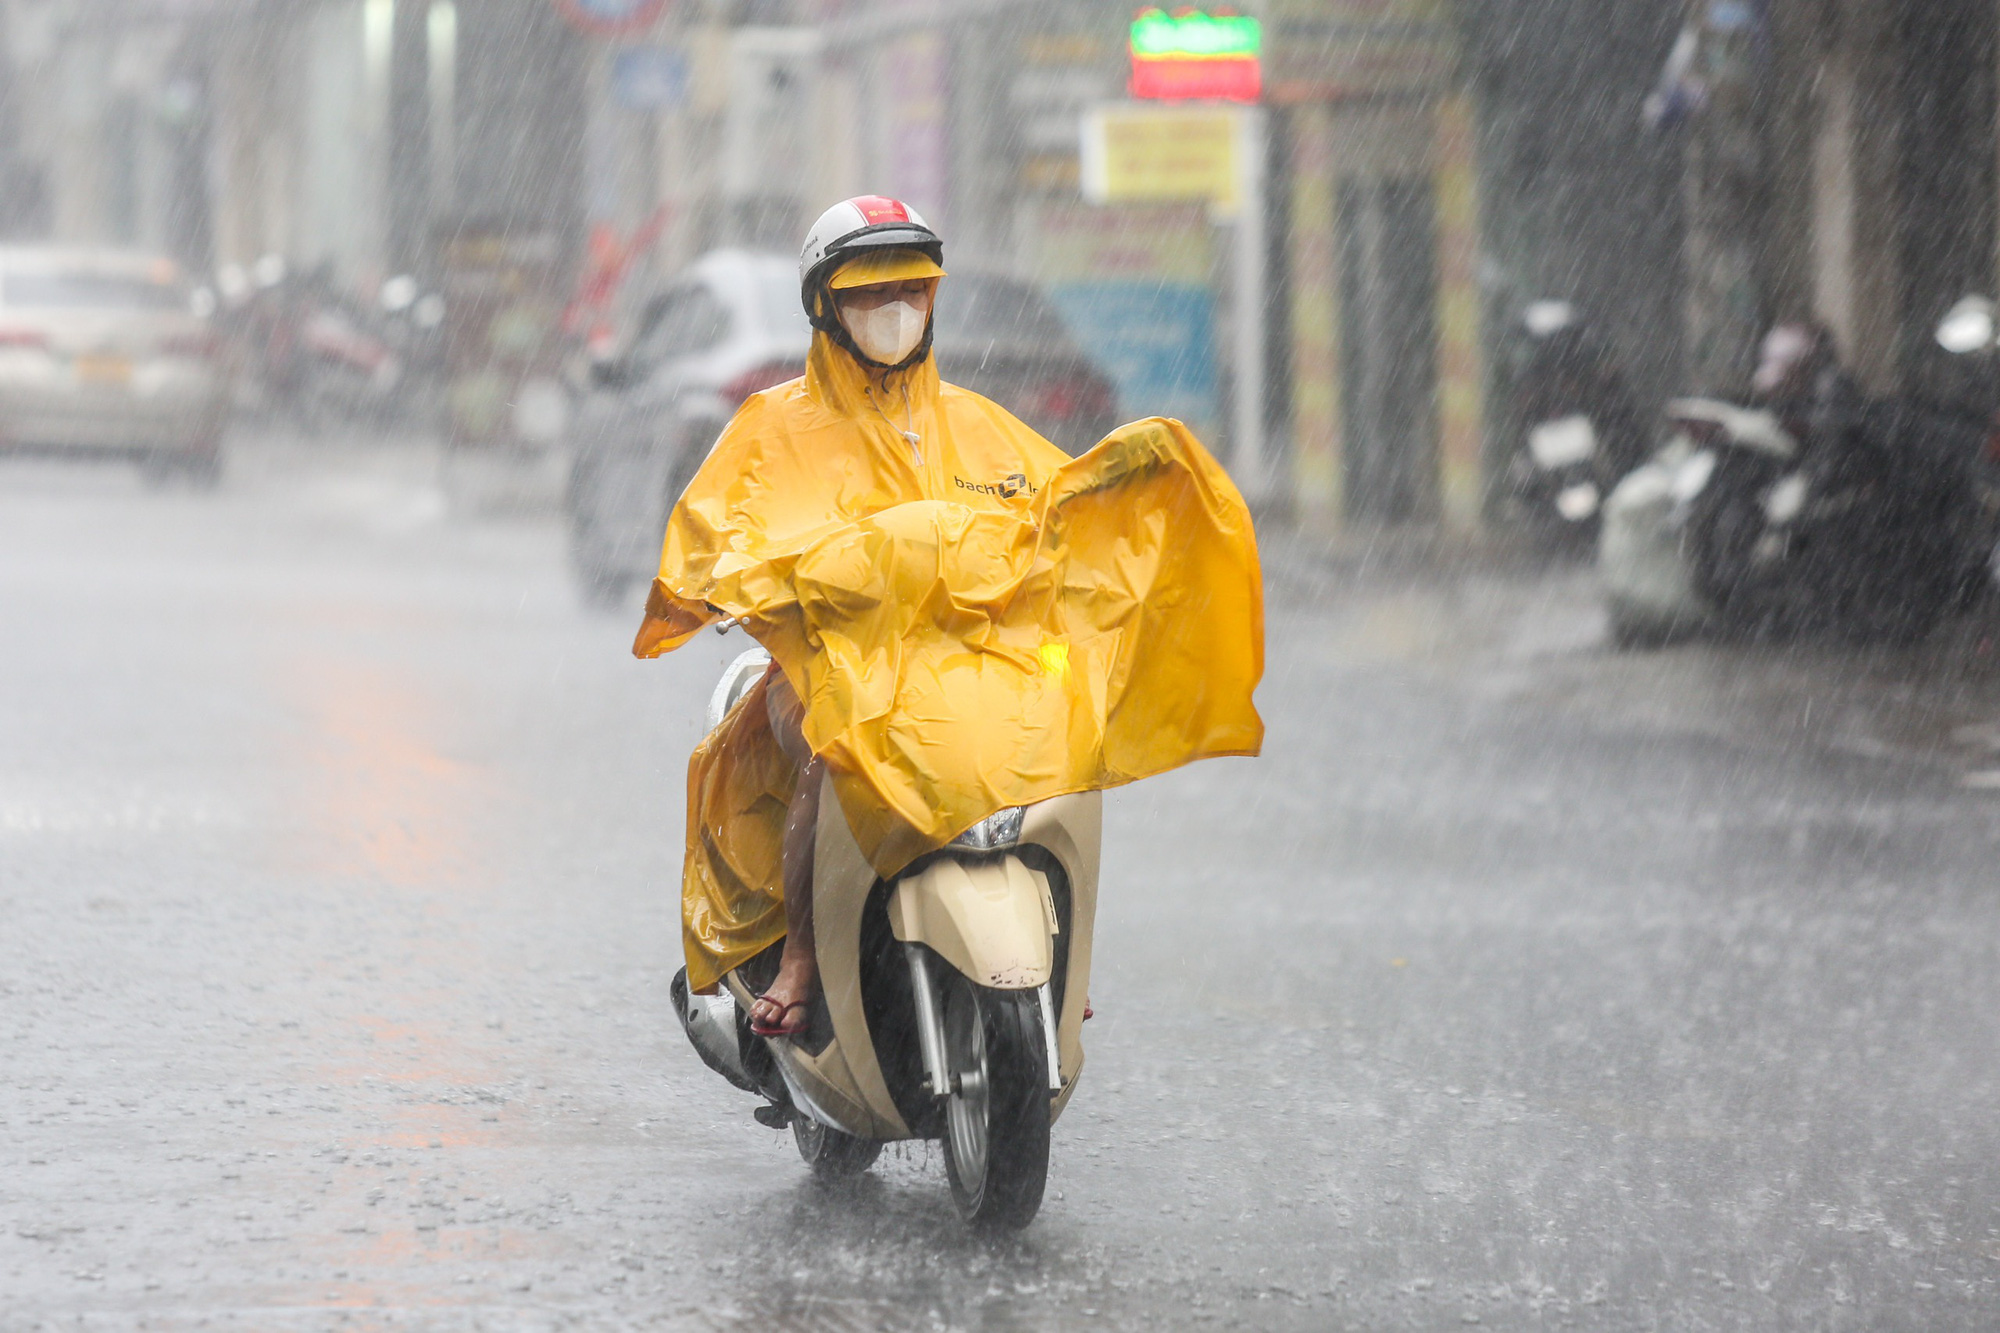 Which place in southern Vietnam will welcome the rainy season’s inaugural rain?